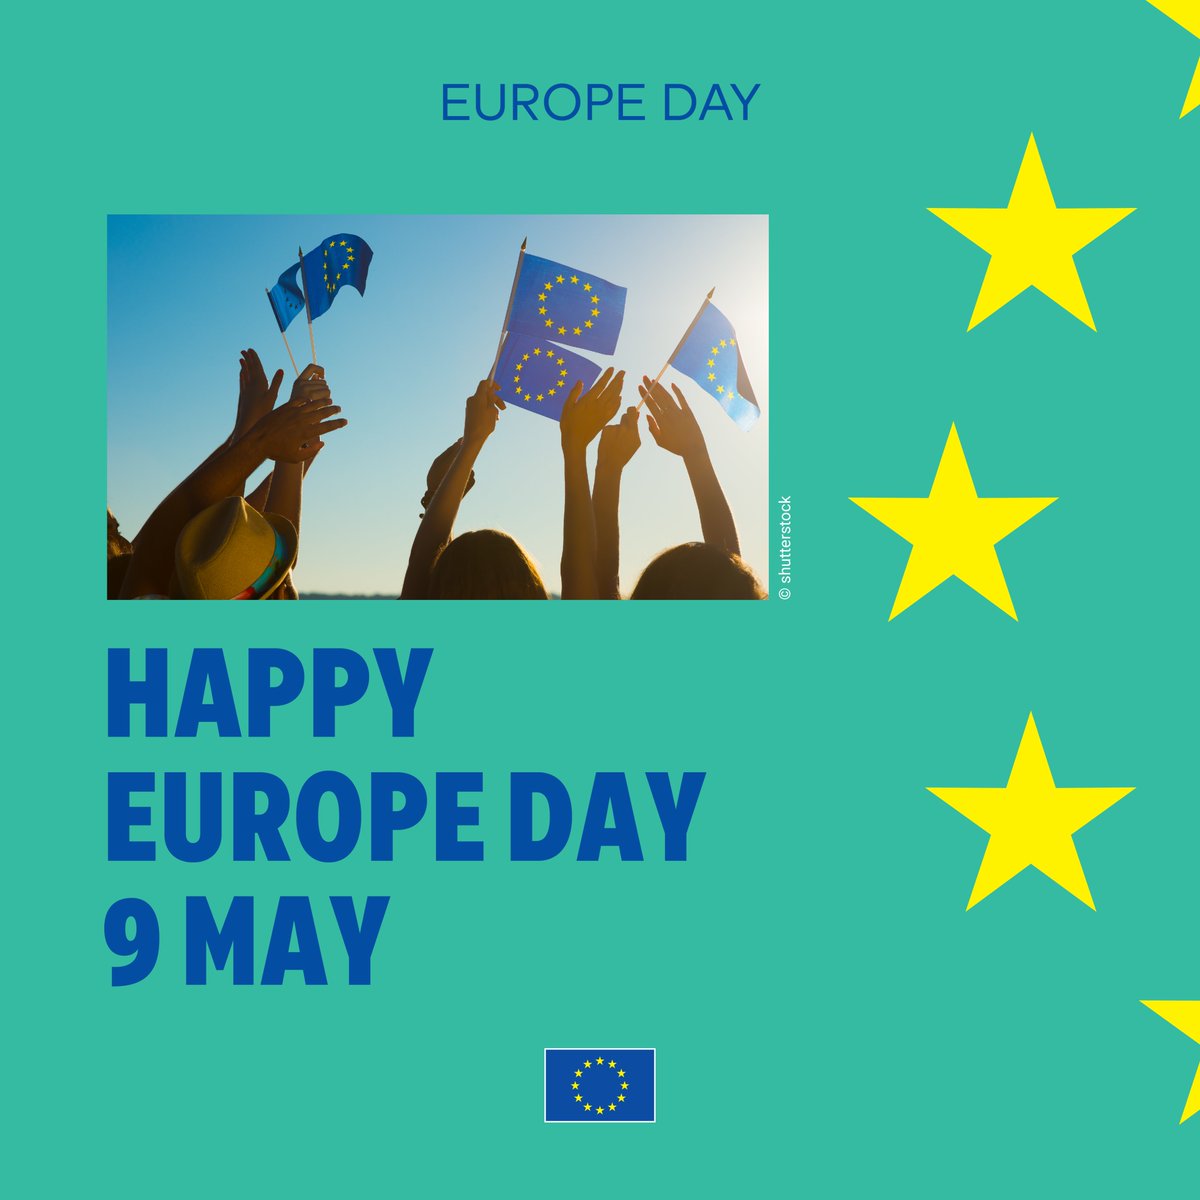 Happy #EuropeDay! On 9 May the EU celebrates the historic 'Schuman declaration' which set Europe on a path of peace & prosperity. To celebrate, @EU_EEAS & the EU Delegations worldwide organise events to celebrate the work the EU does to promote a fairer & more sustainable world